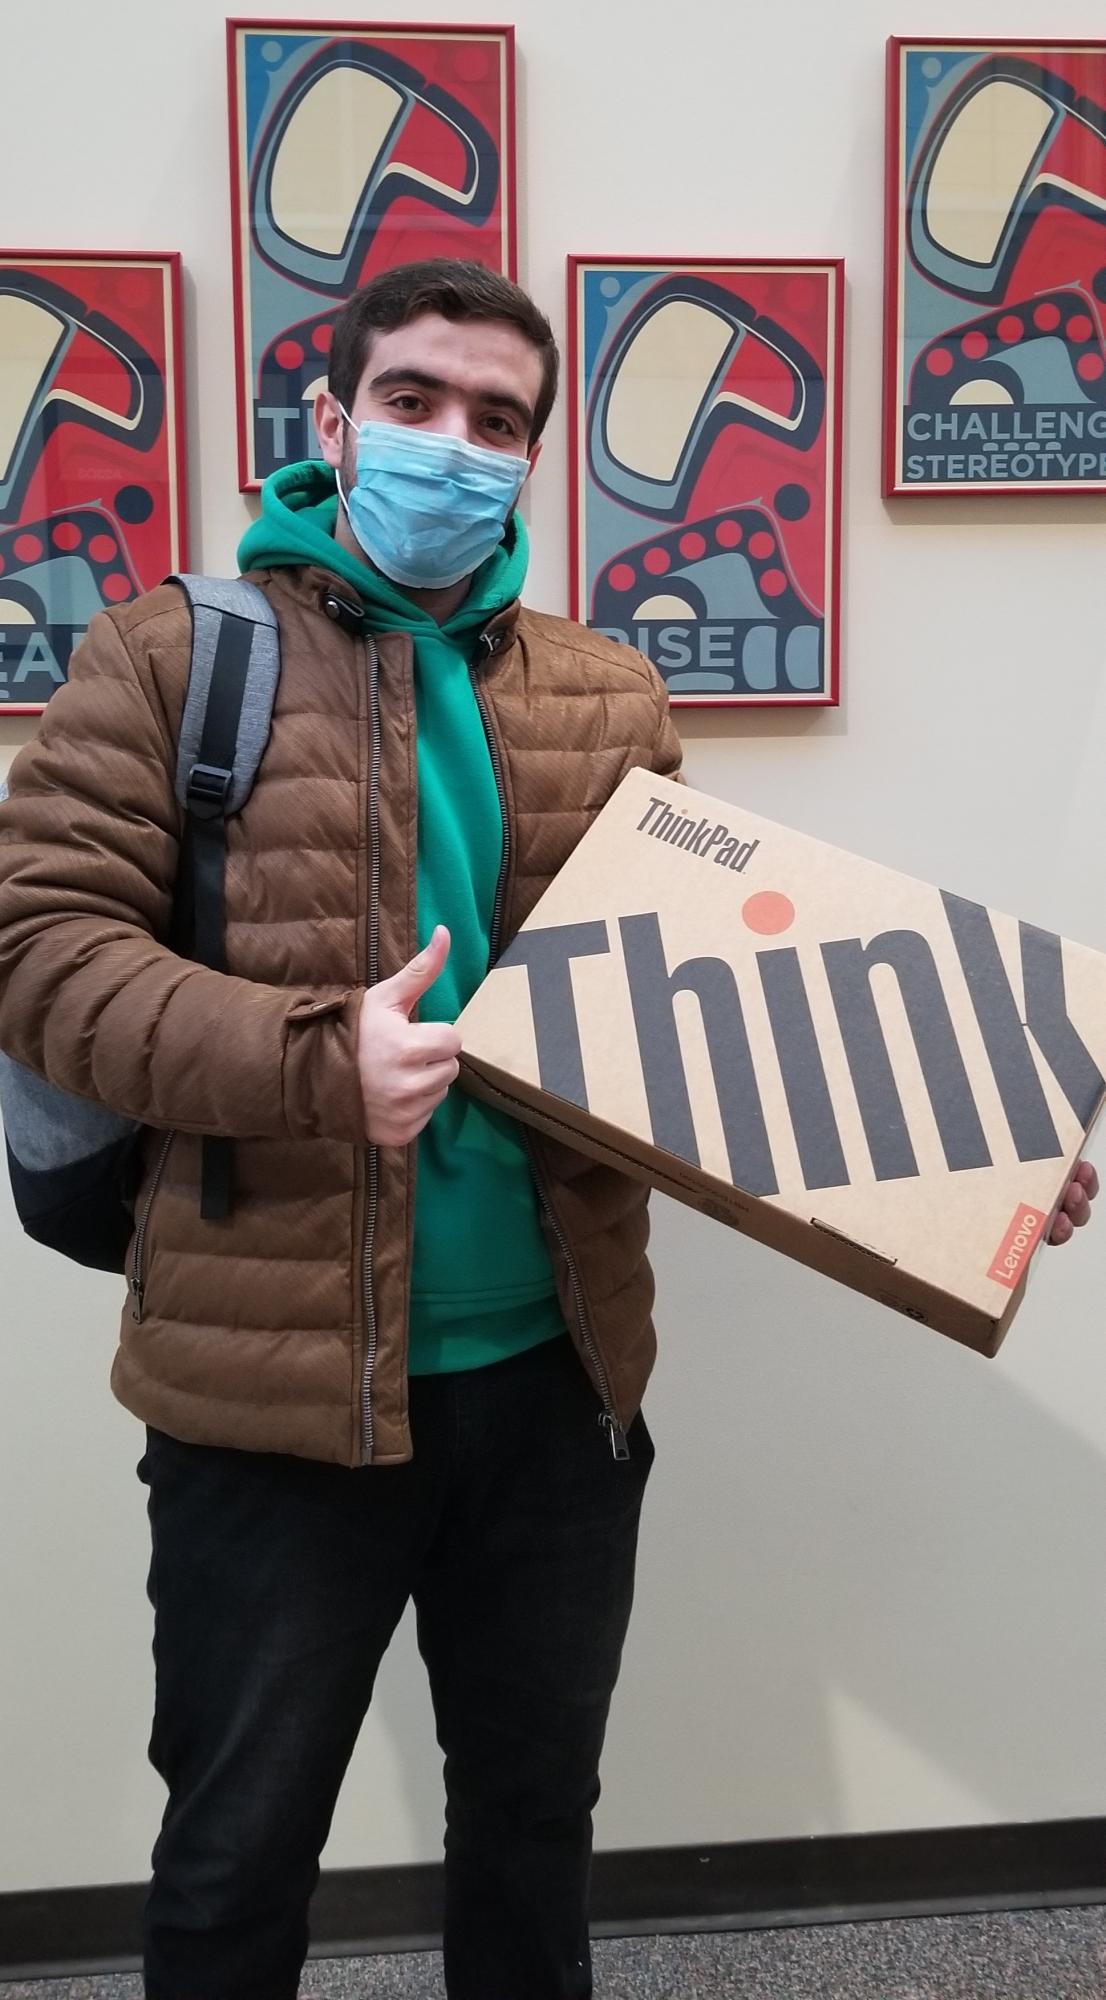 Student with Thinkpad